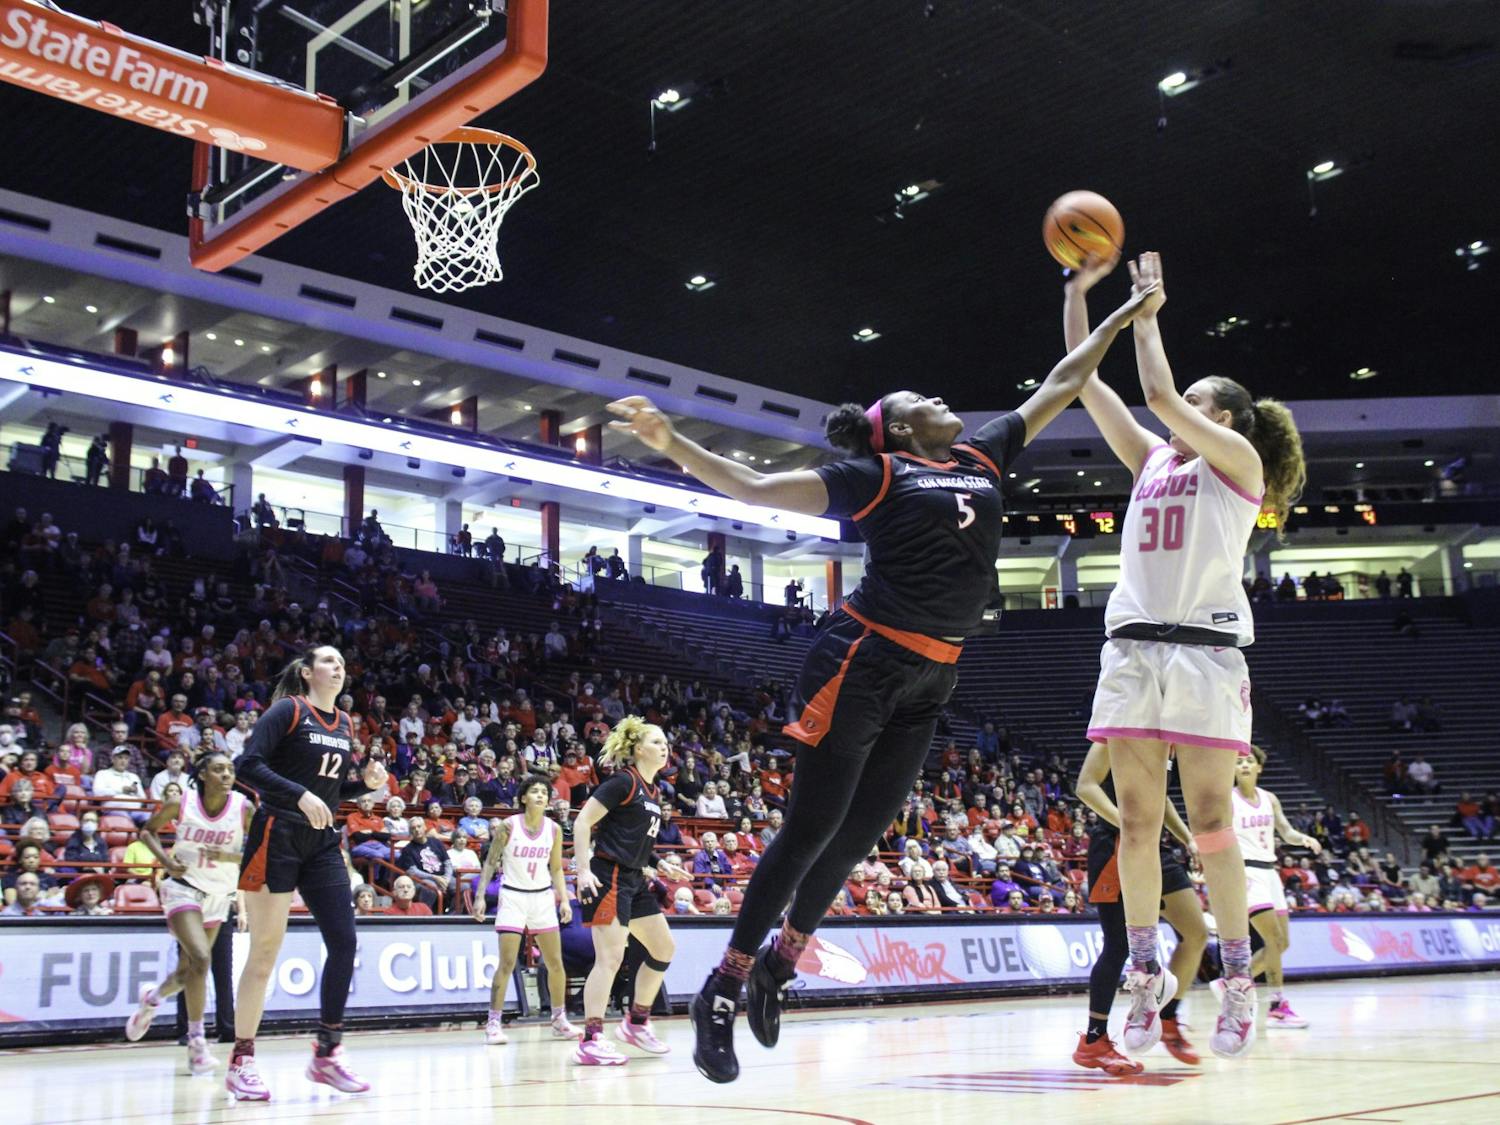 GALLERY: Women's Basketball v. San Diego State